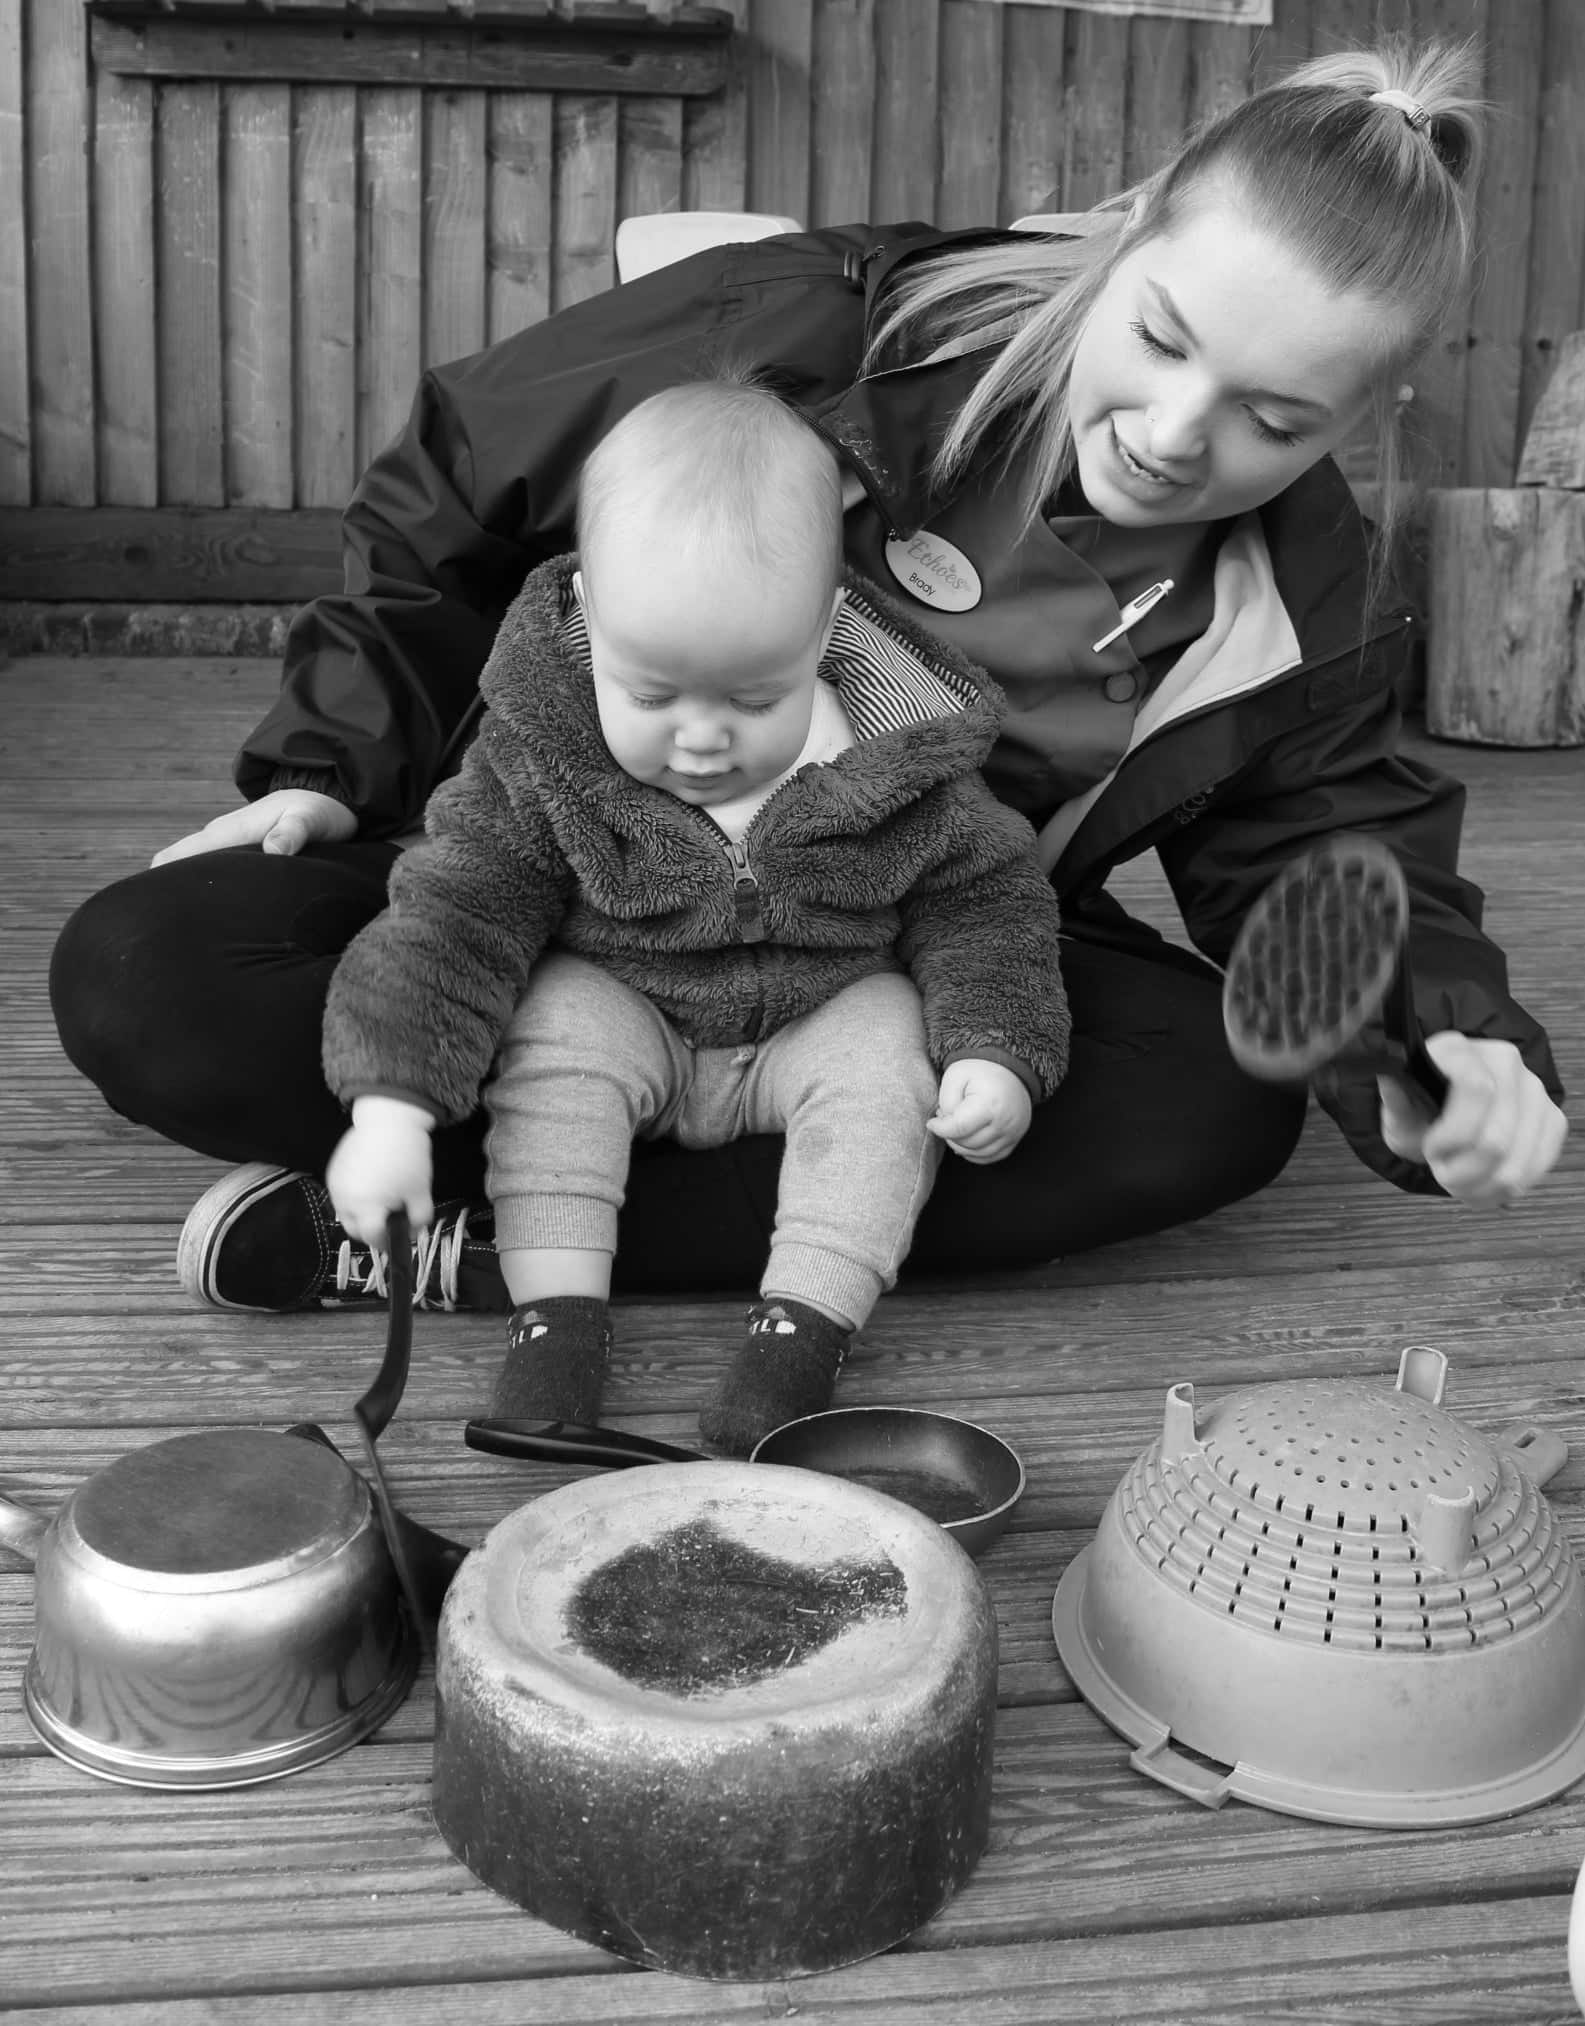 Staff member with baby sitting on lap playing with pots and pans